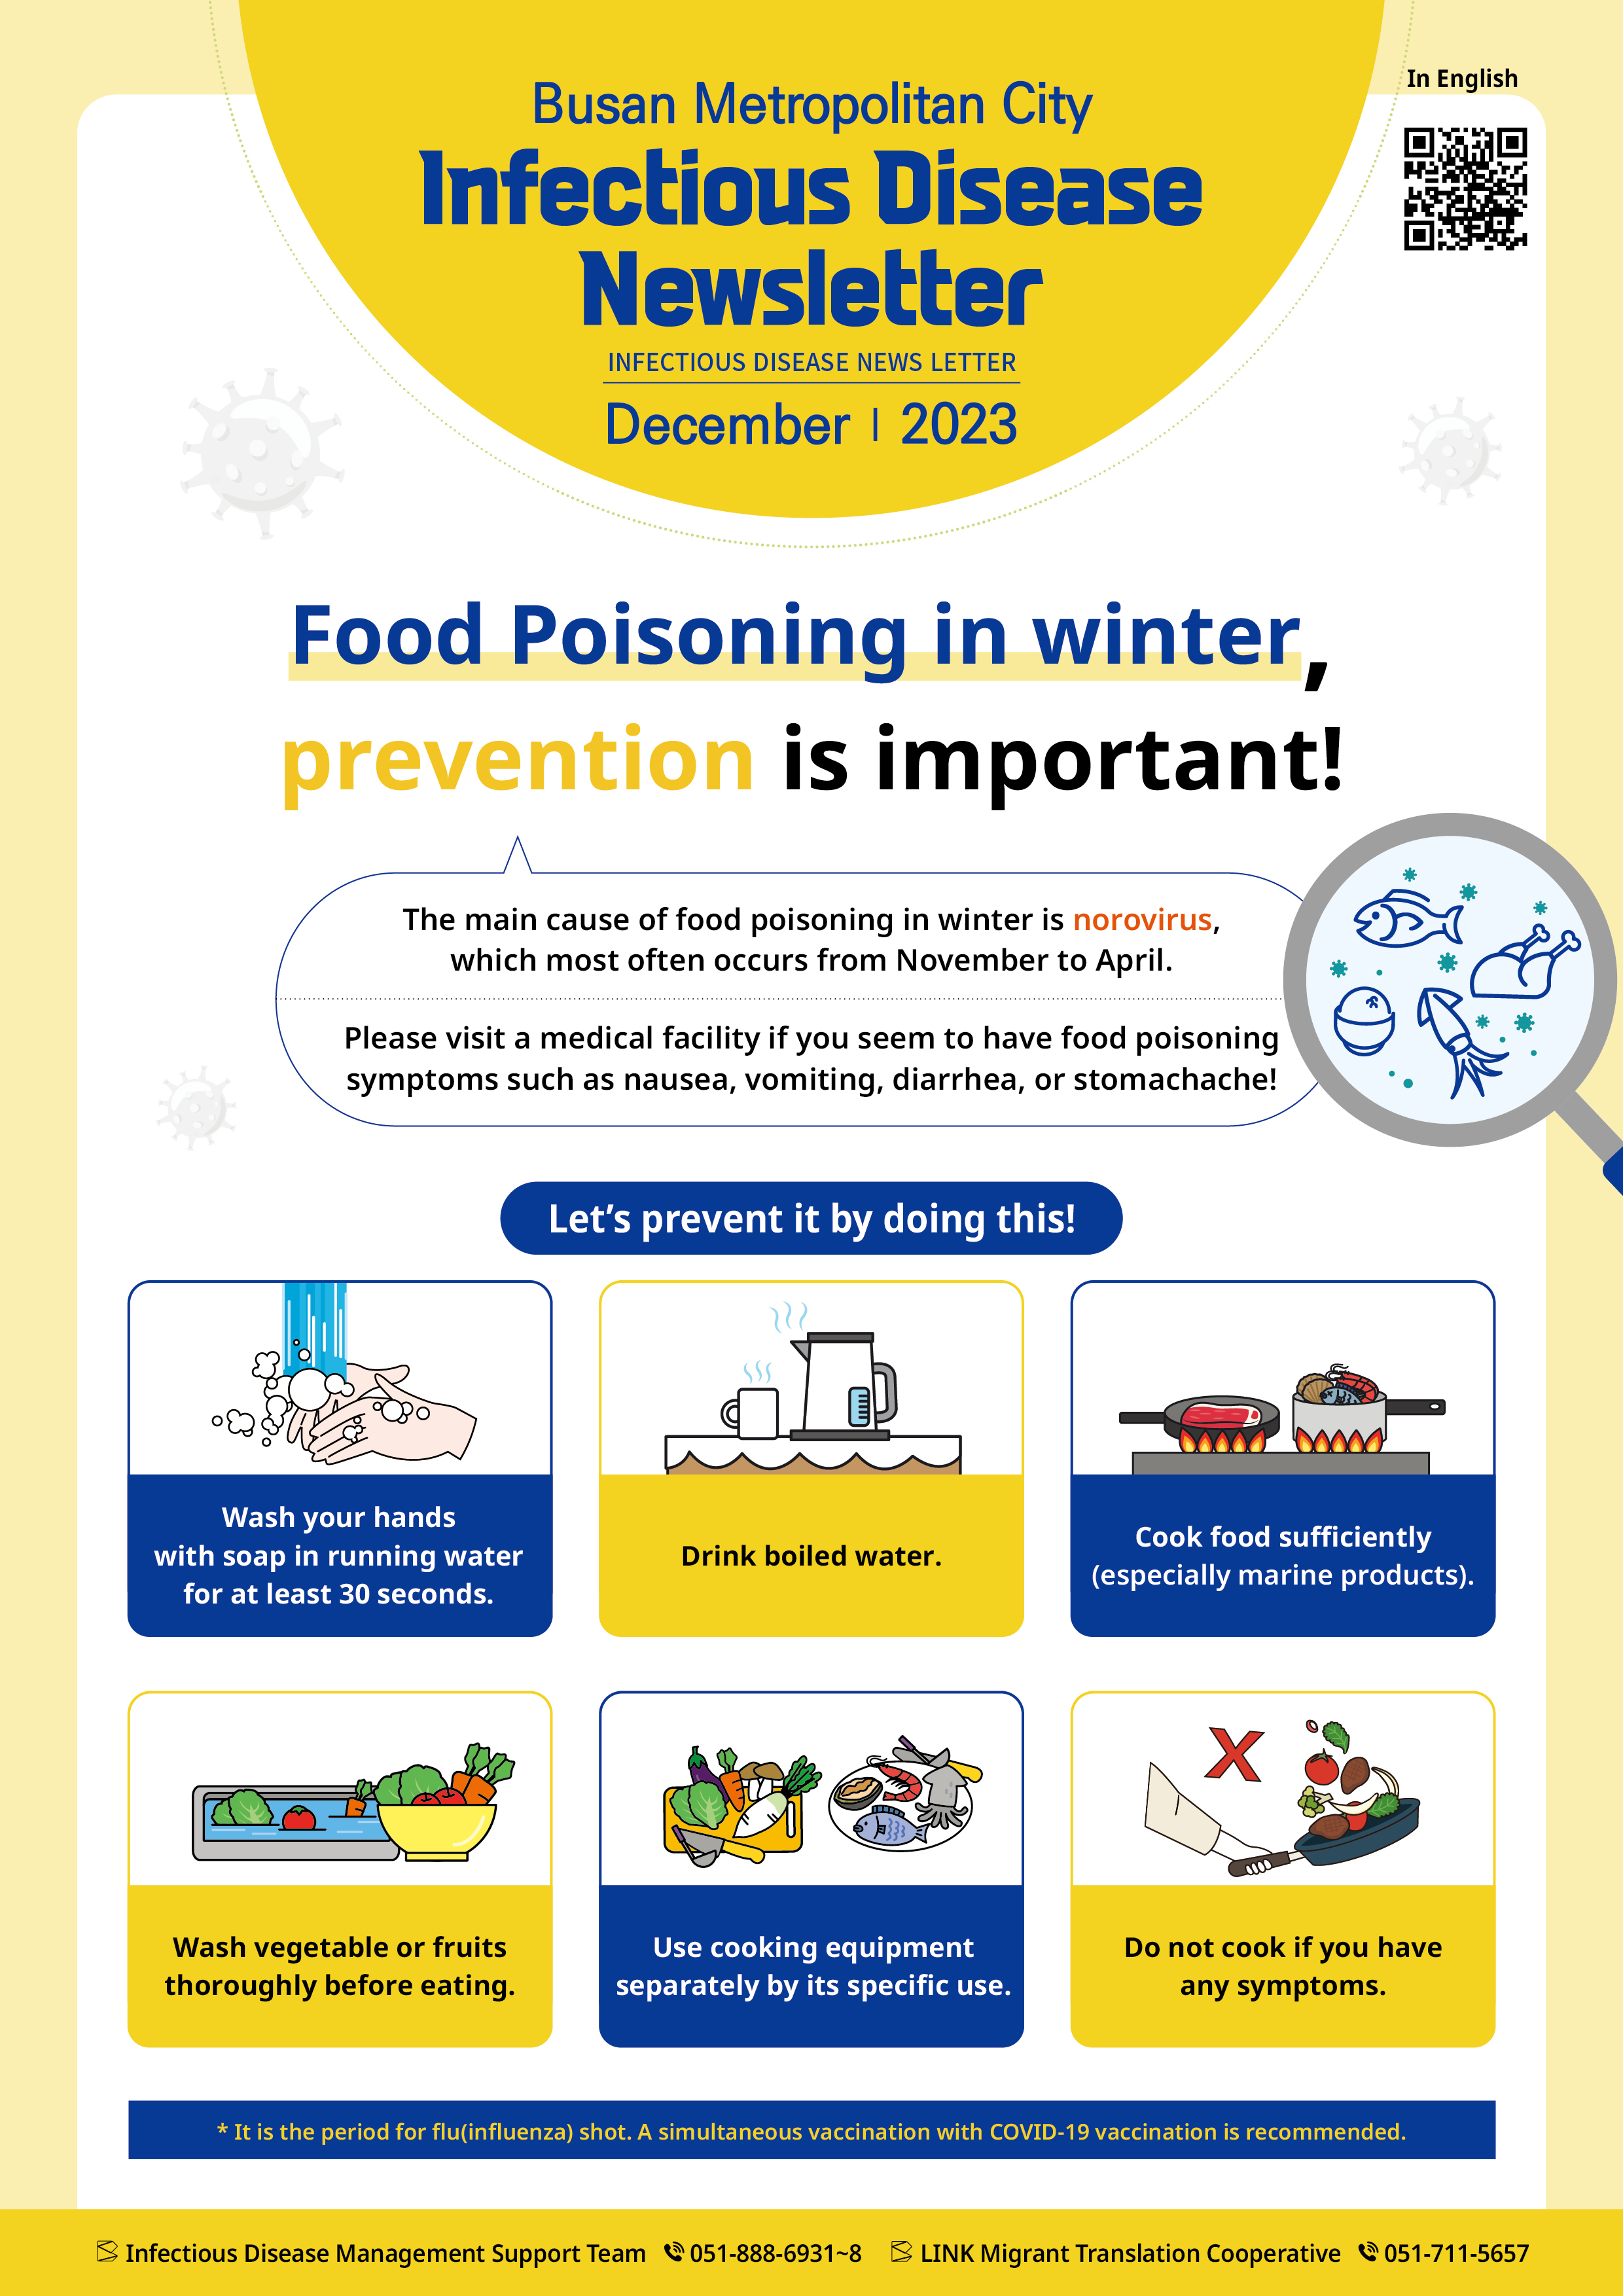 Food Poisoning in winter, prevention is important!
- The main cause of food poisoning in winter is norovirus, which most often occurs from November to April. 
- Please visit a medical facility if you seem to have food poisoning symptoms such as nausea, vomiting, diarrhea, or stomachache!
Let’s prevent it by doing this!
Wash your hands with soap in running water for at least 30 seconds.
Drink boiled water.
Cook food sufficiently
(especially marine products).
Wash vegetable or fruits thoroughly before eating
Use cooking equipment separately by its specific use.
Do not cook if you have any symptoms.
* It is the period for flu (influenza) shot. A simultaneous vaccination with COVID-19 vaccination is recommended.
Infectious Disease Management Support Team 051-888-6931~8 
LINK Migrant Translation Cooperative 051-711-5657

 사진0